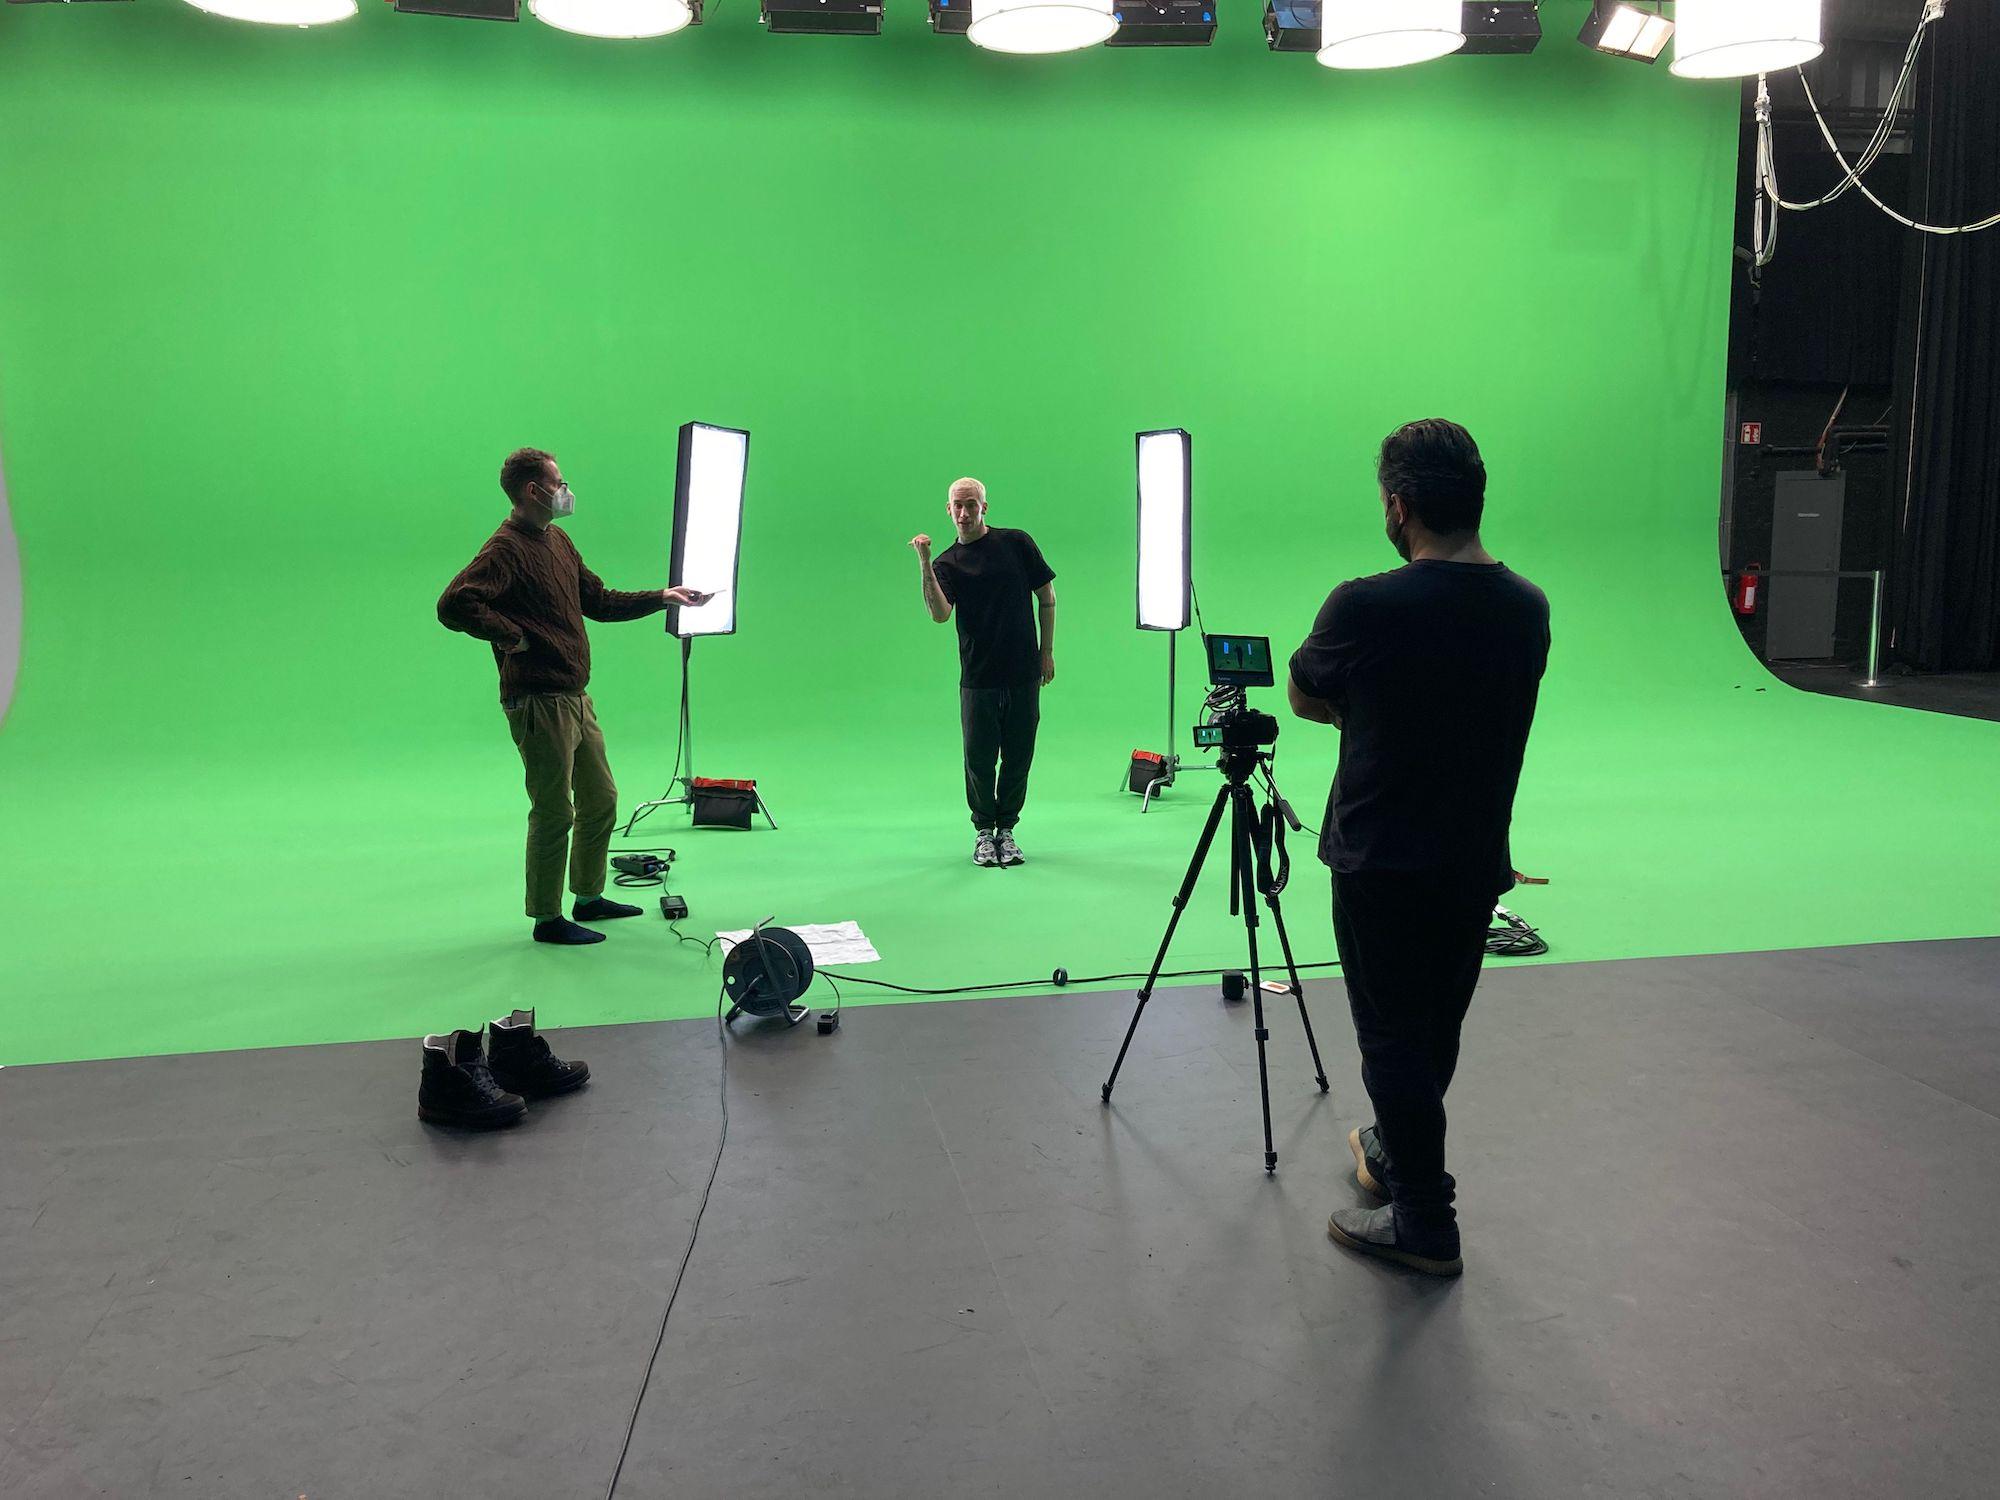 3 men stand in a green screen studio. One directs, one films, and one dances between 2 soft boxes.